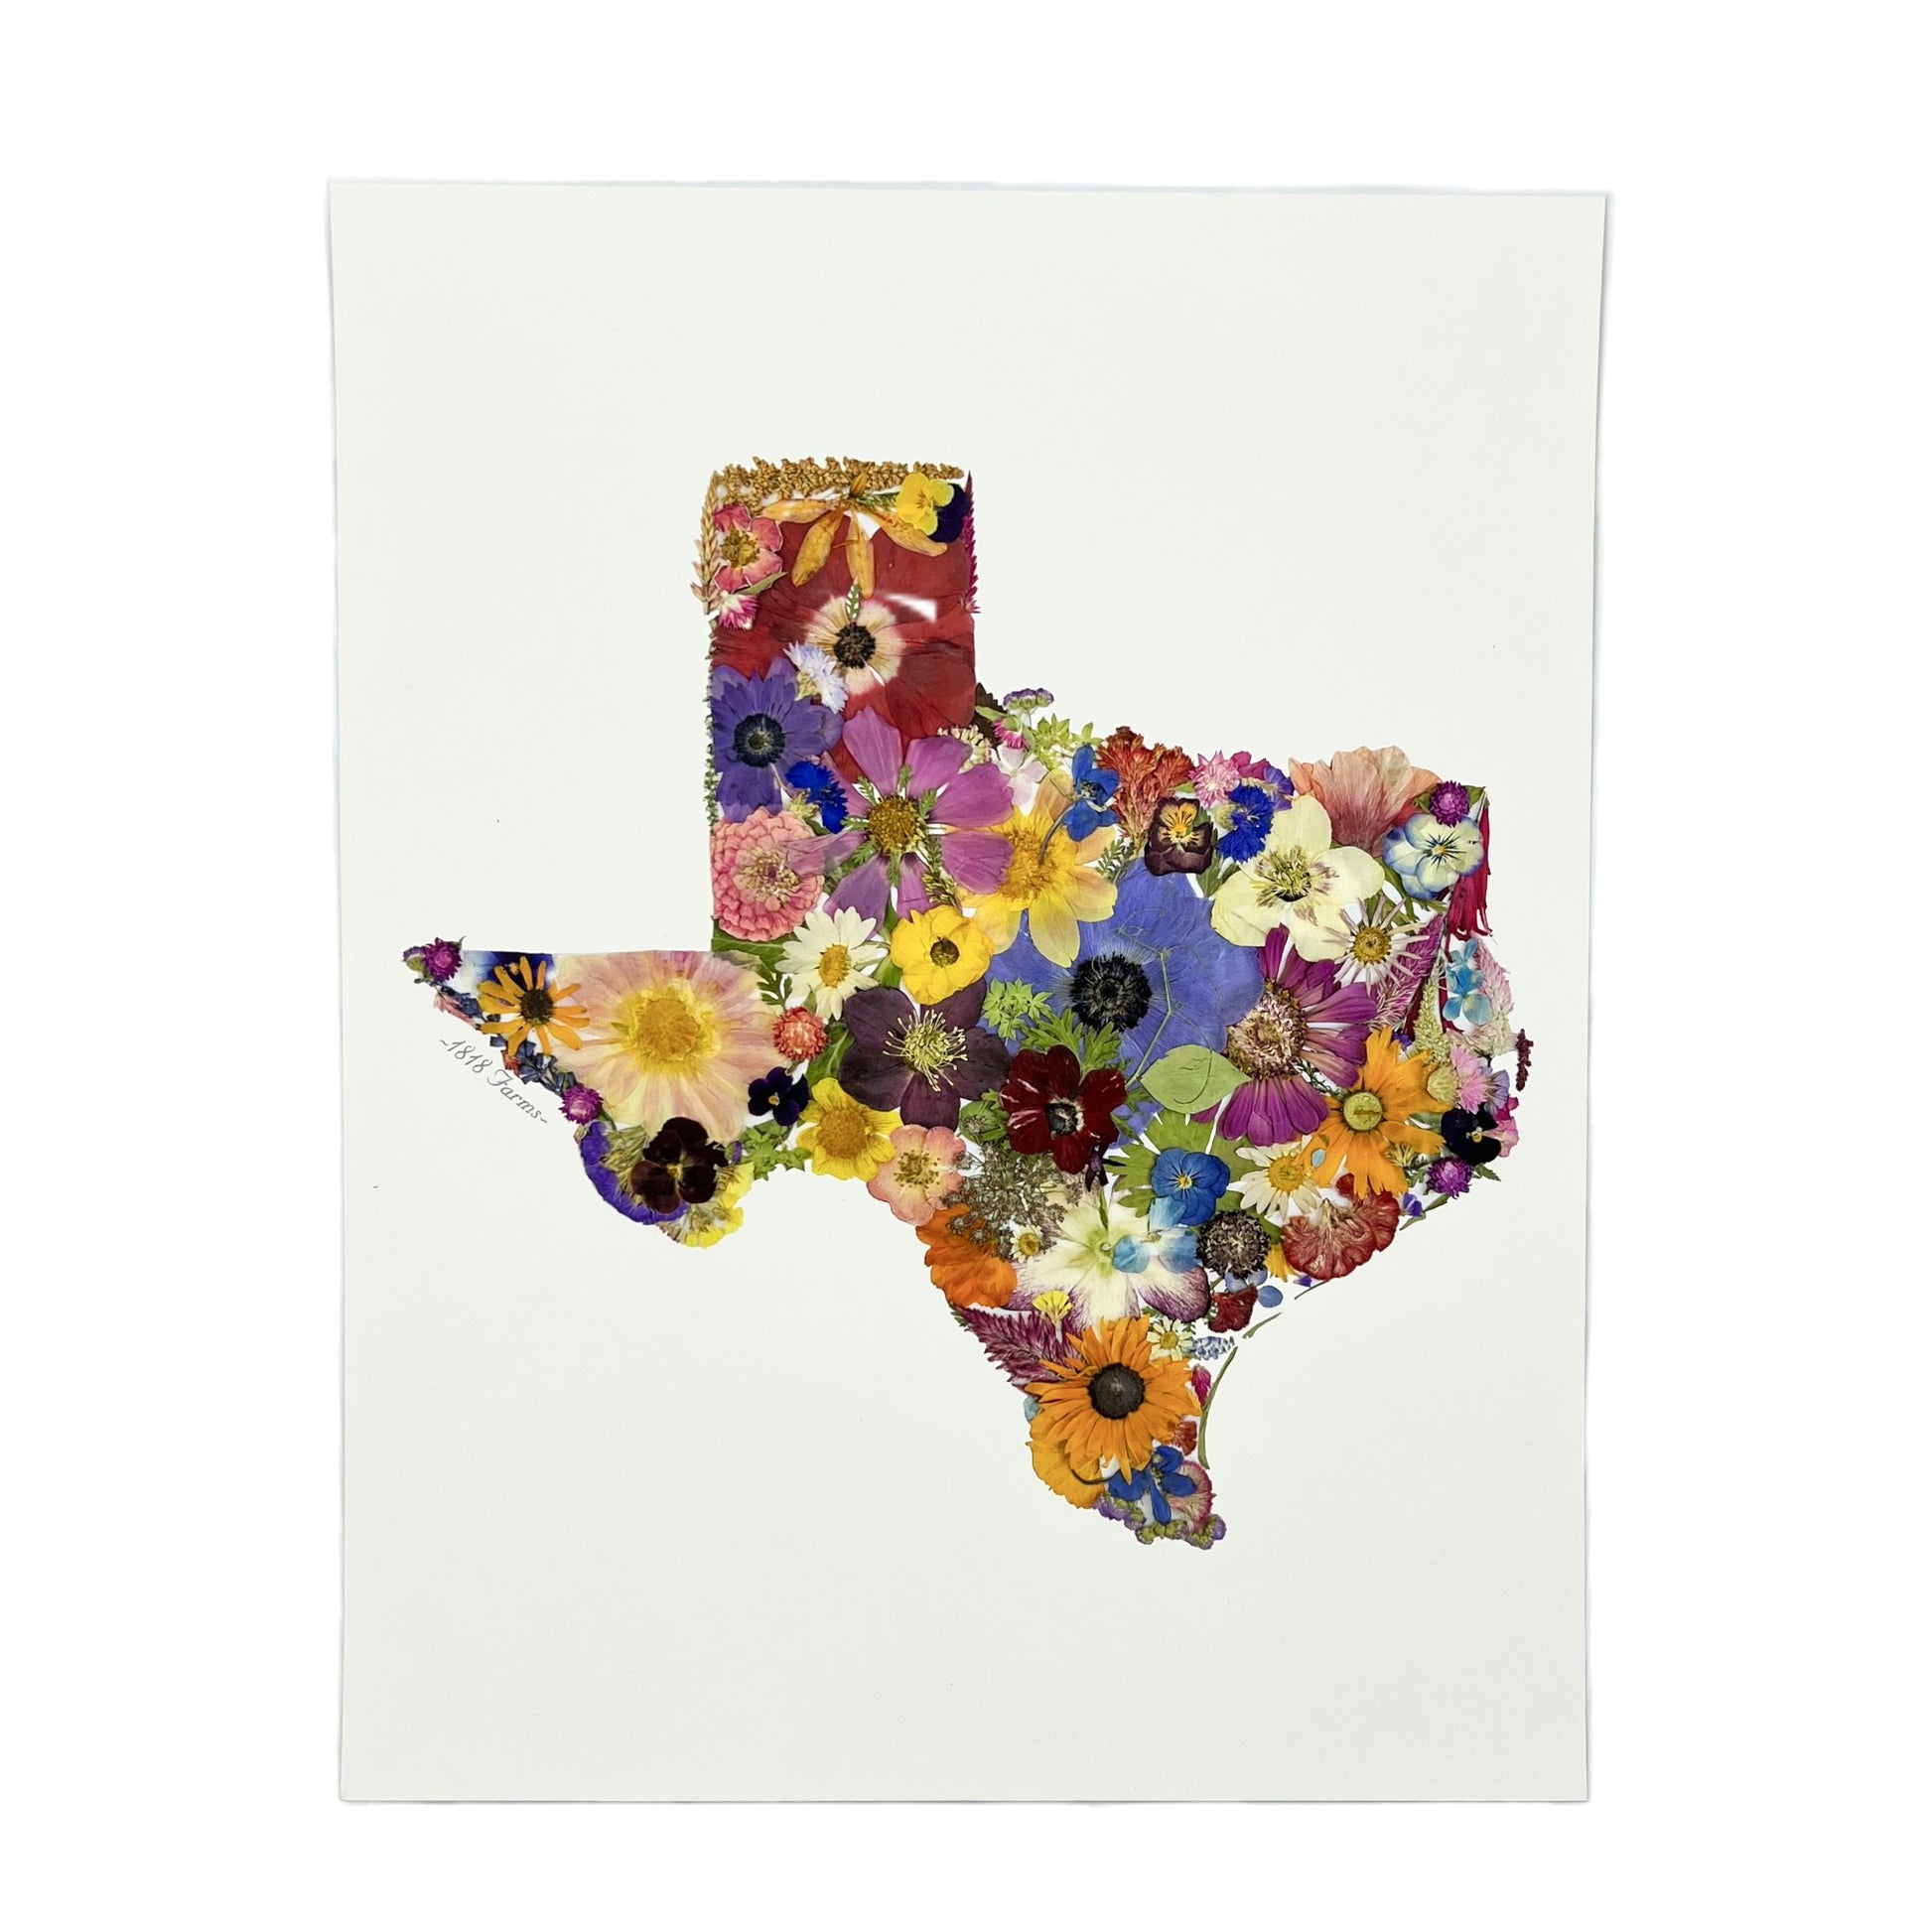 State Themed Giclée Print  - "Where I Bloom" Collection Giclee Art Print 1818 Farms 11"x14" Texas 